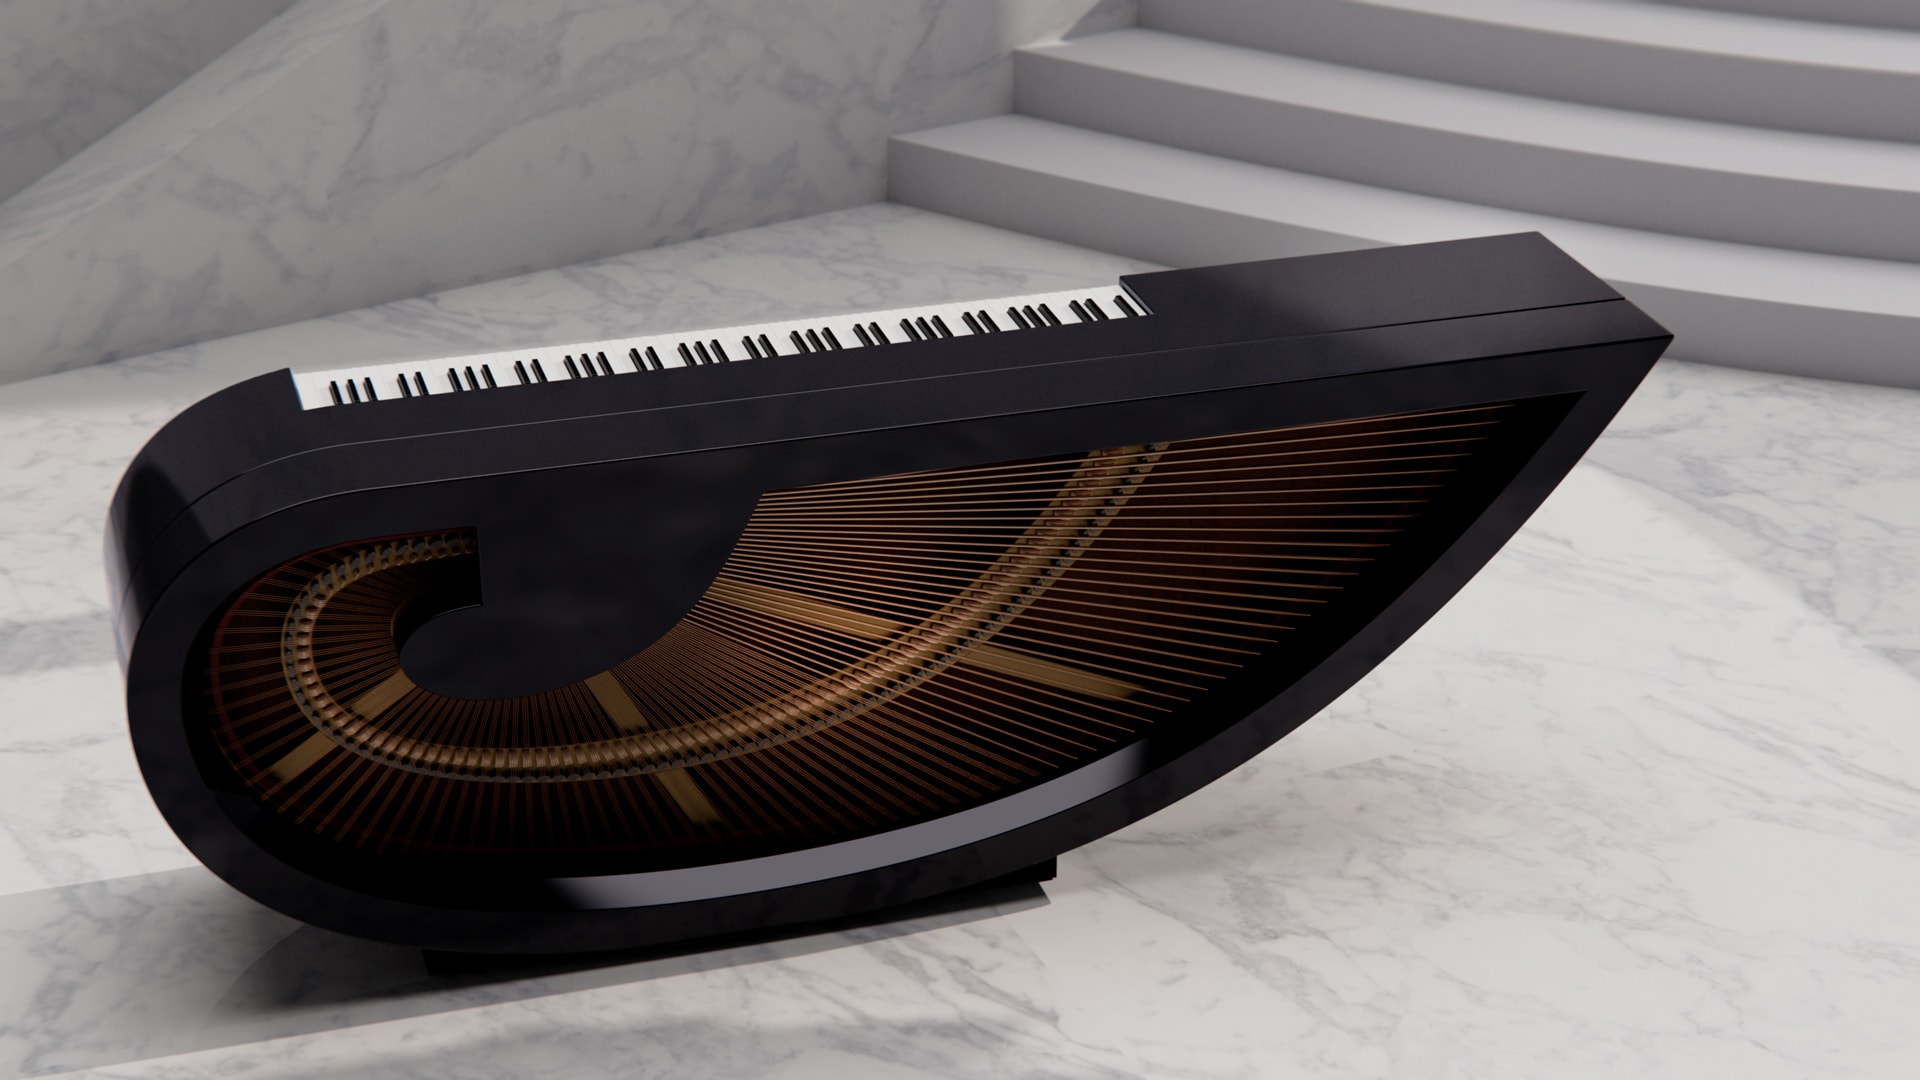 The wing-shaped Ravenchord is a redesigned baby grand piano